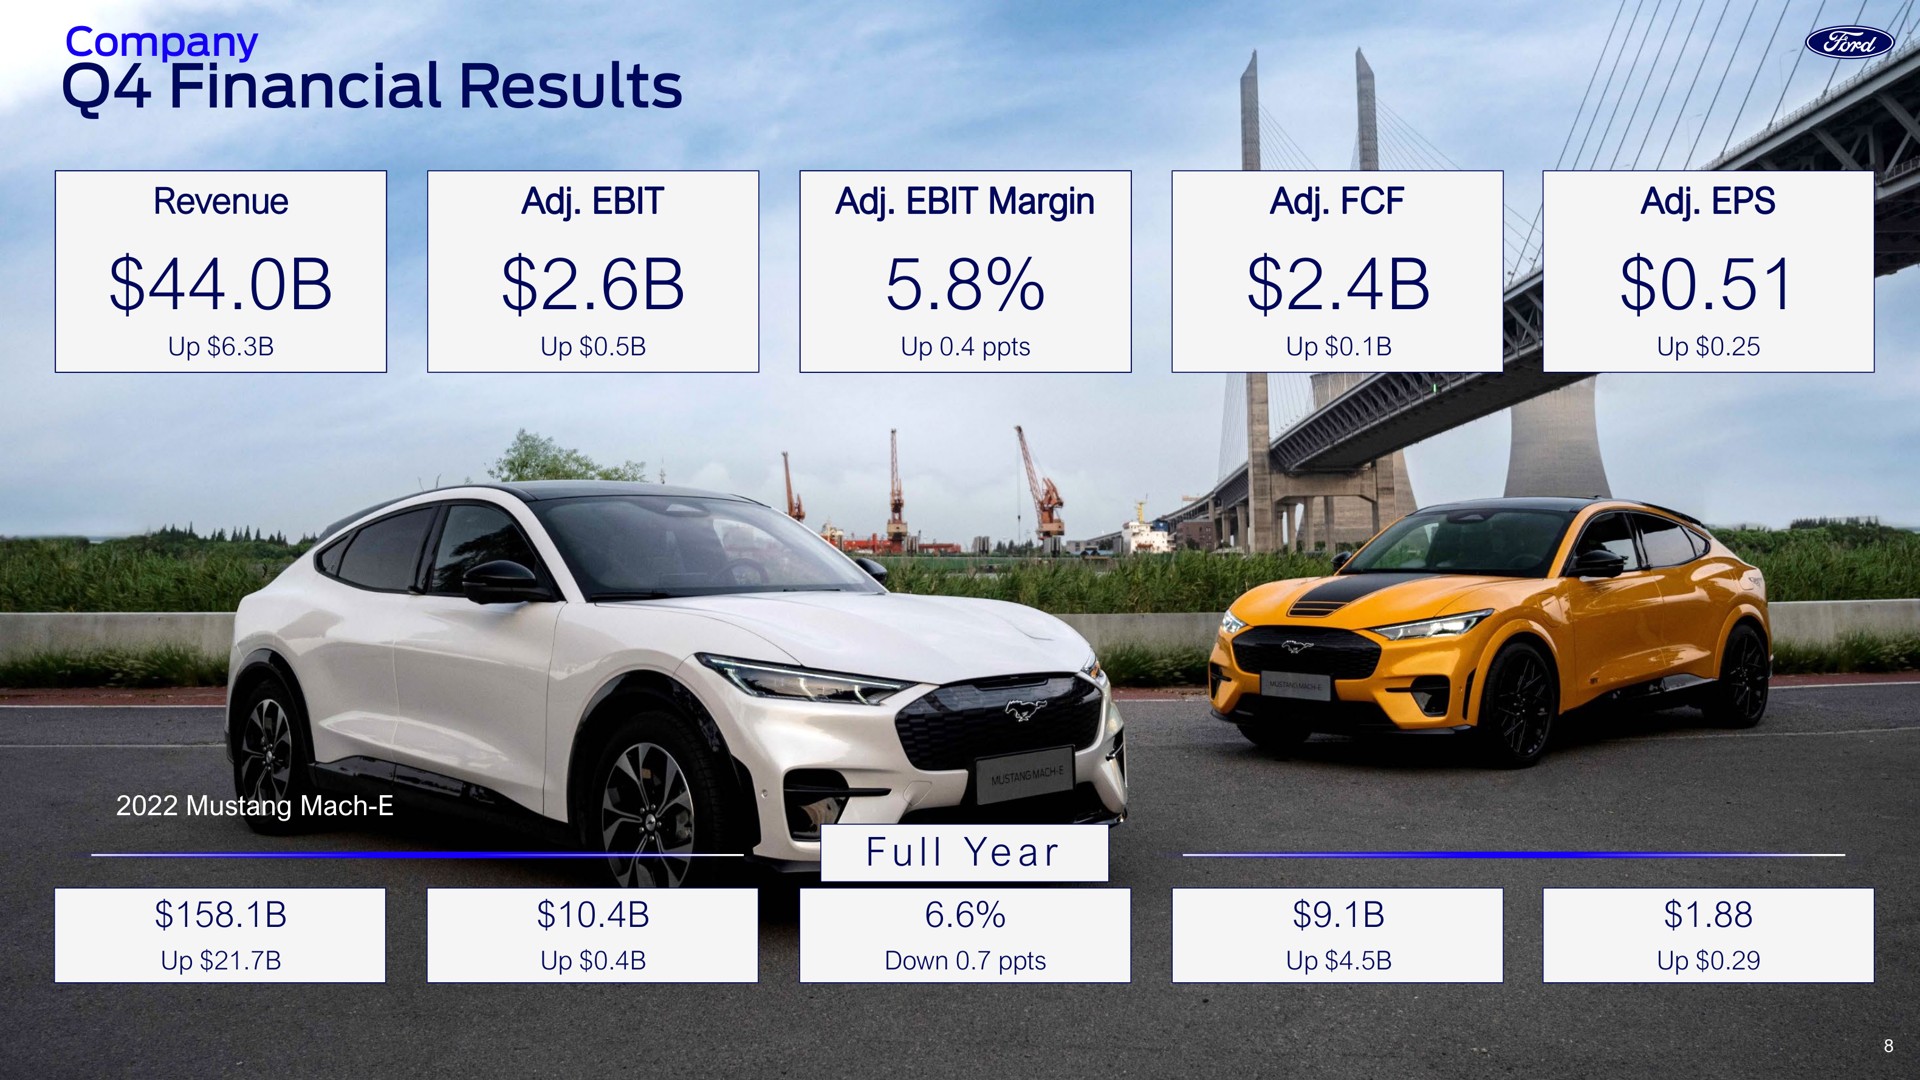 financial results i a ull year | Ford Credit